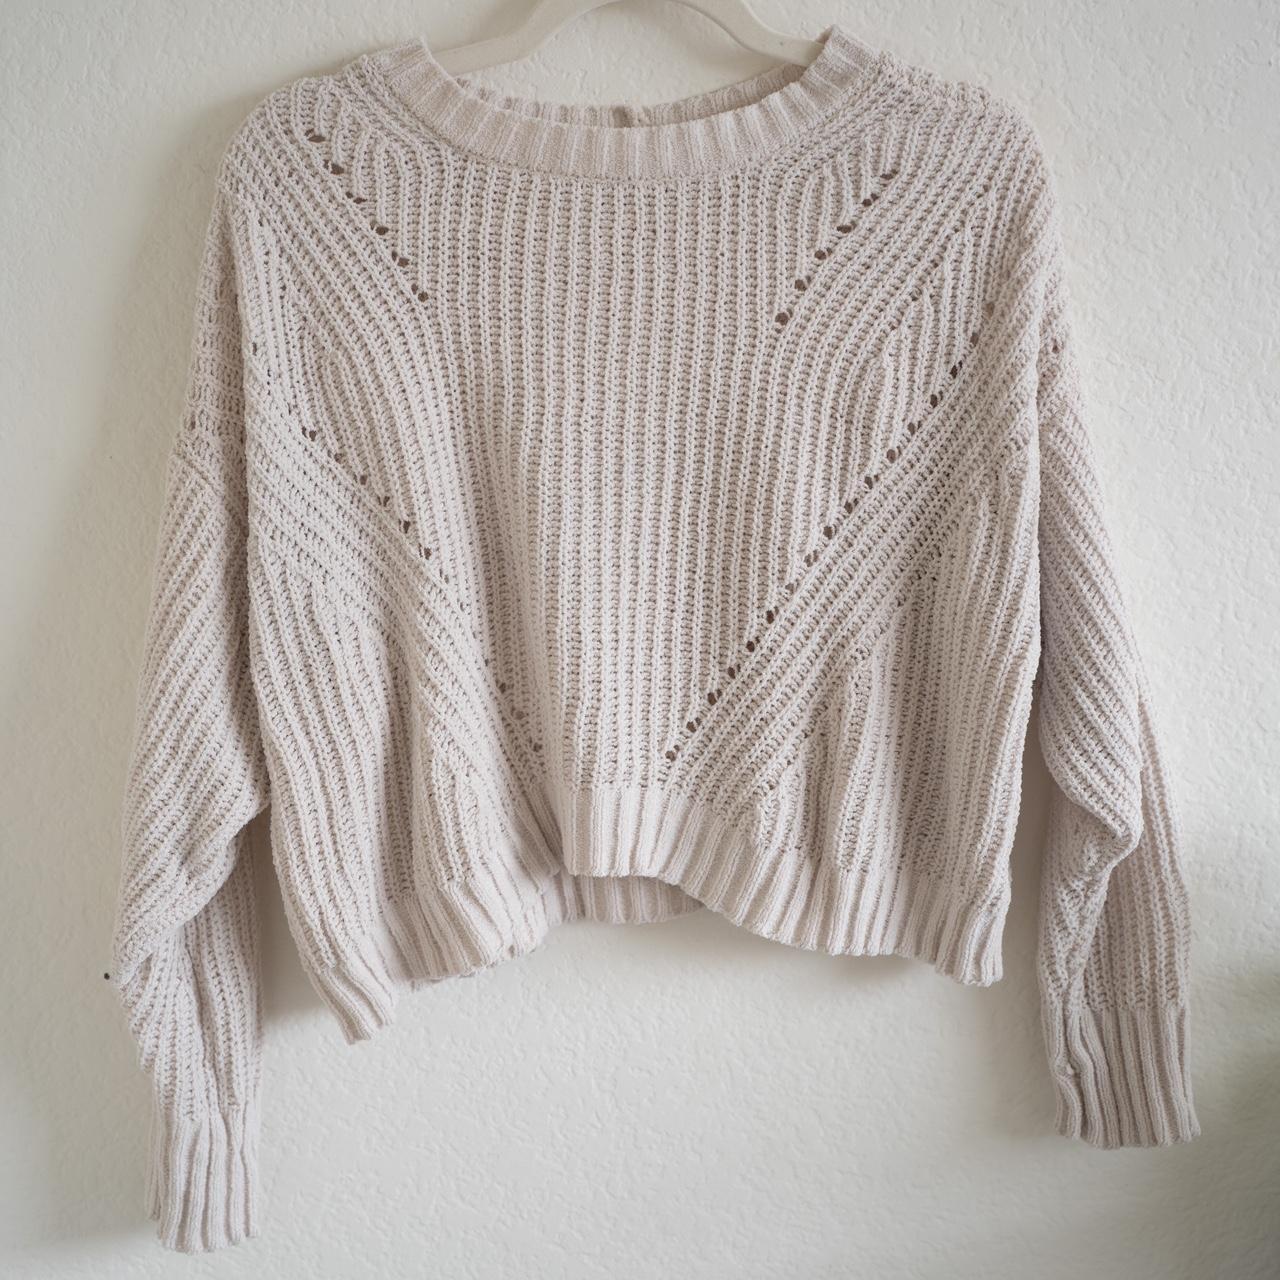 Springy and airy sweater - Depop